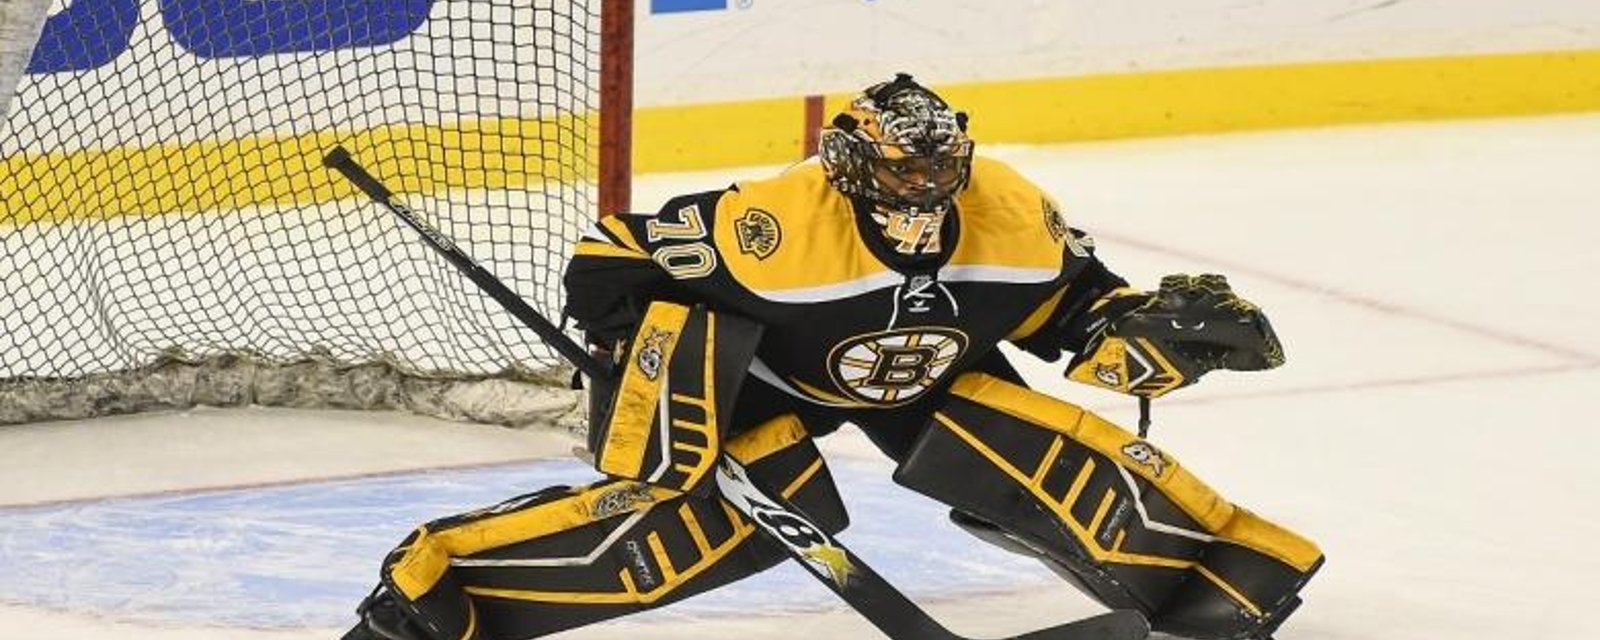 Injury Update: News not good for Malcolm Subban